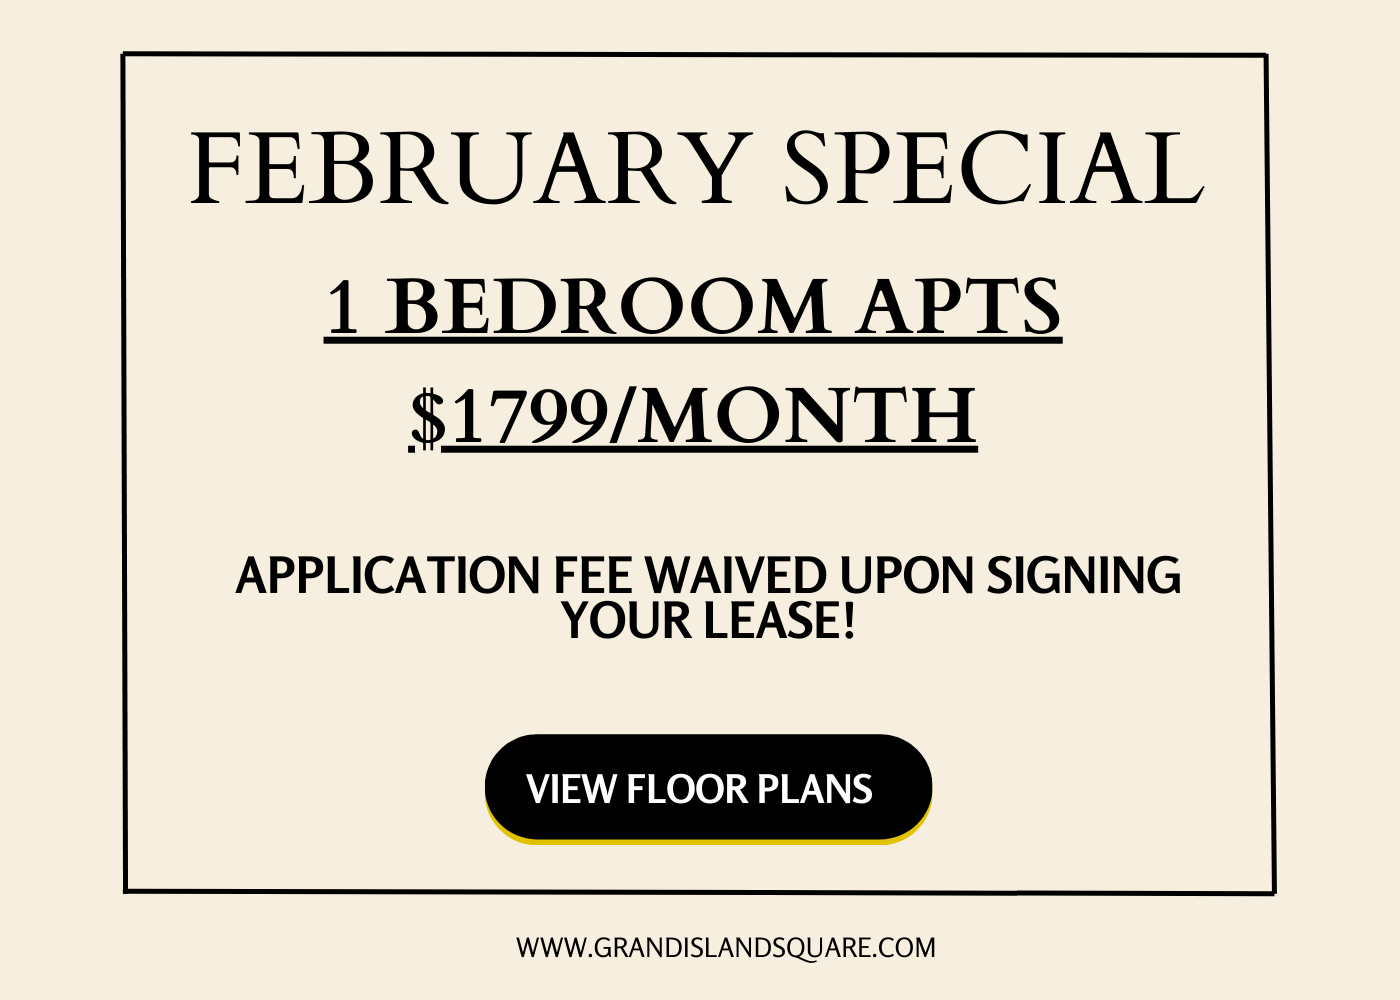 February Special – One Bedroom Apartments at $1799 per Month and Application Fee Waived Upon Signing Your Lease!